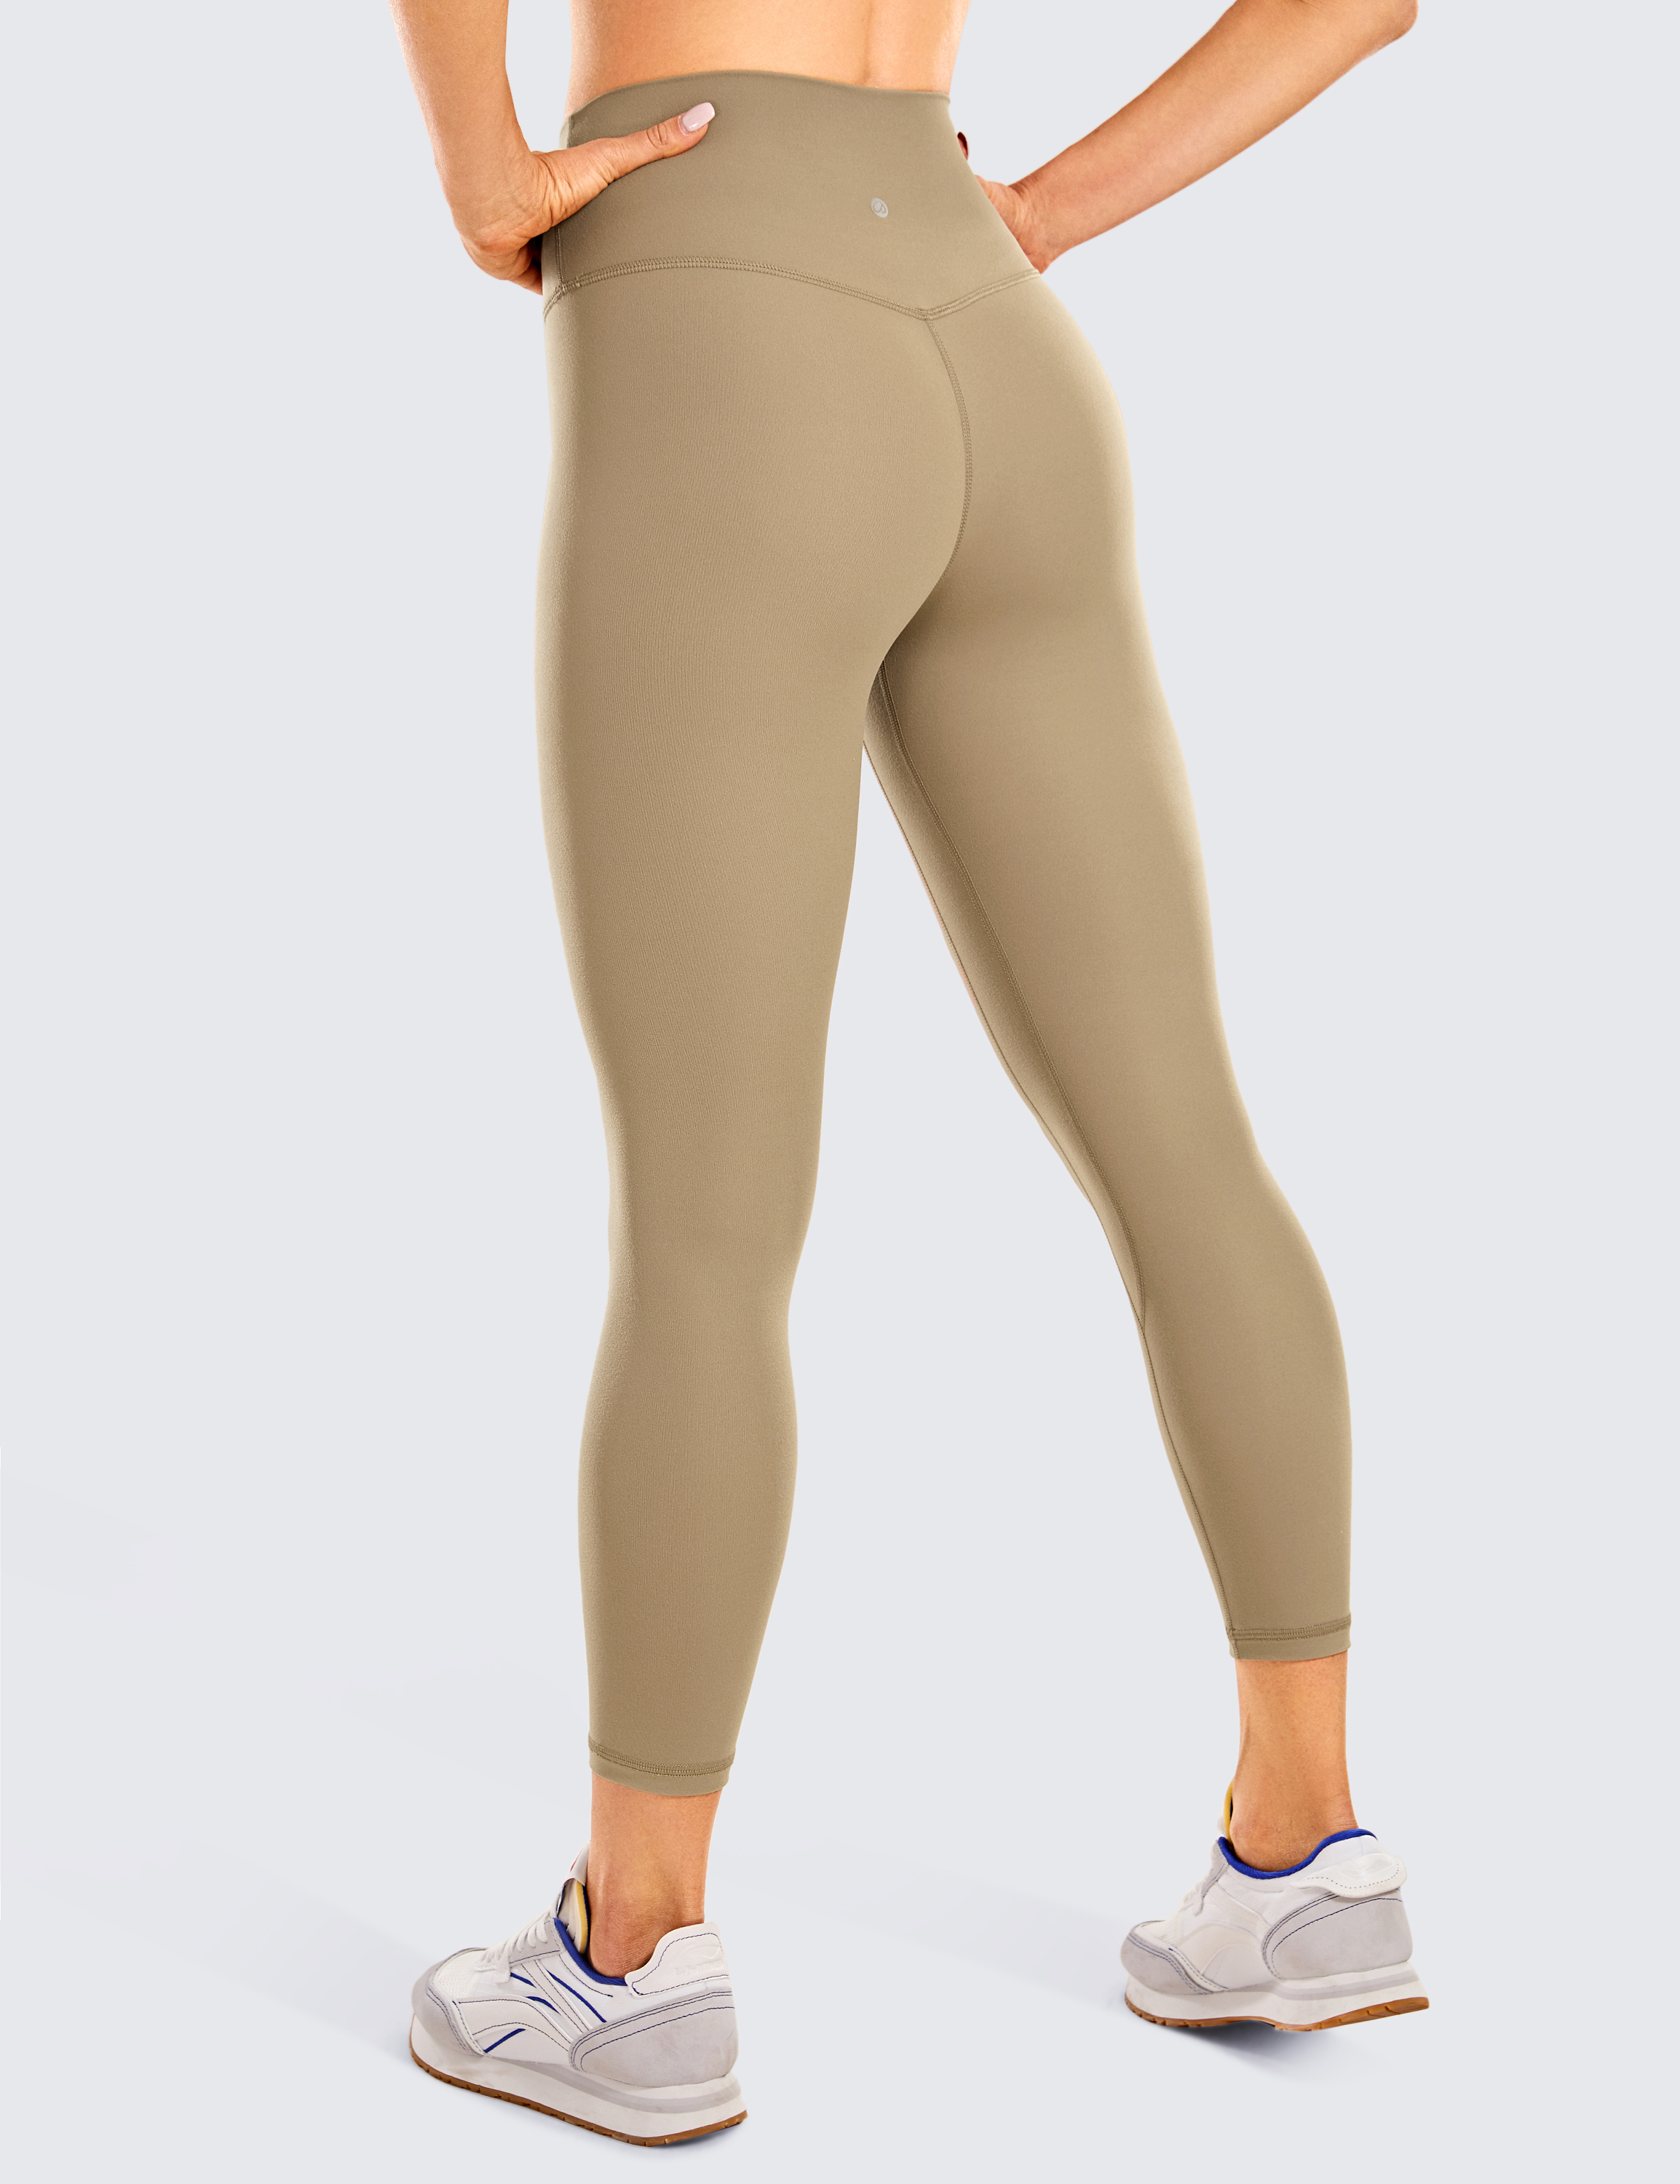 CRZ YOGA Women's Brushed Naked Feeling Workout Leggings 25 Inches - High  Waist Matte Soft Yoga Leggings with Pockets - AliExpress